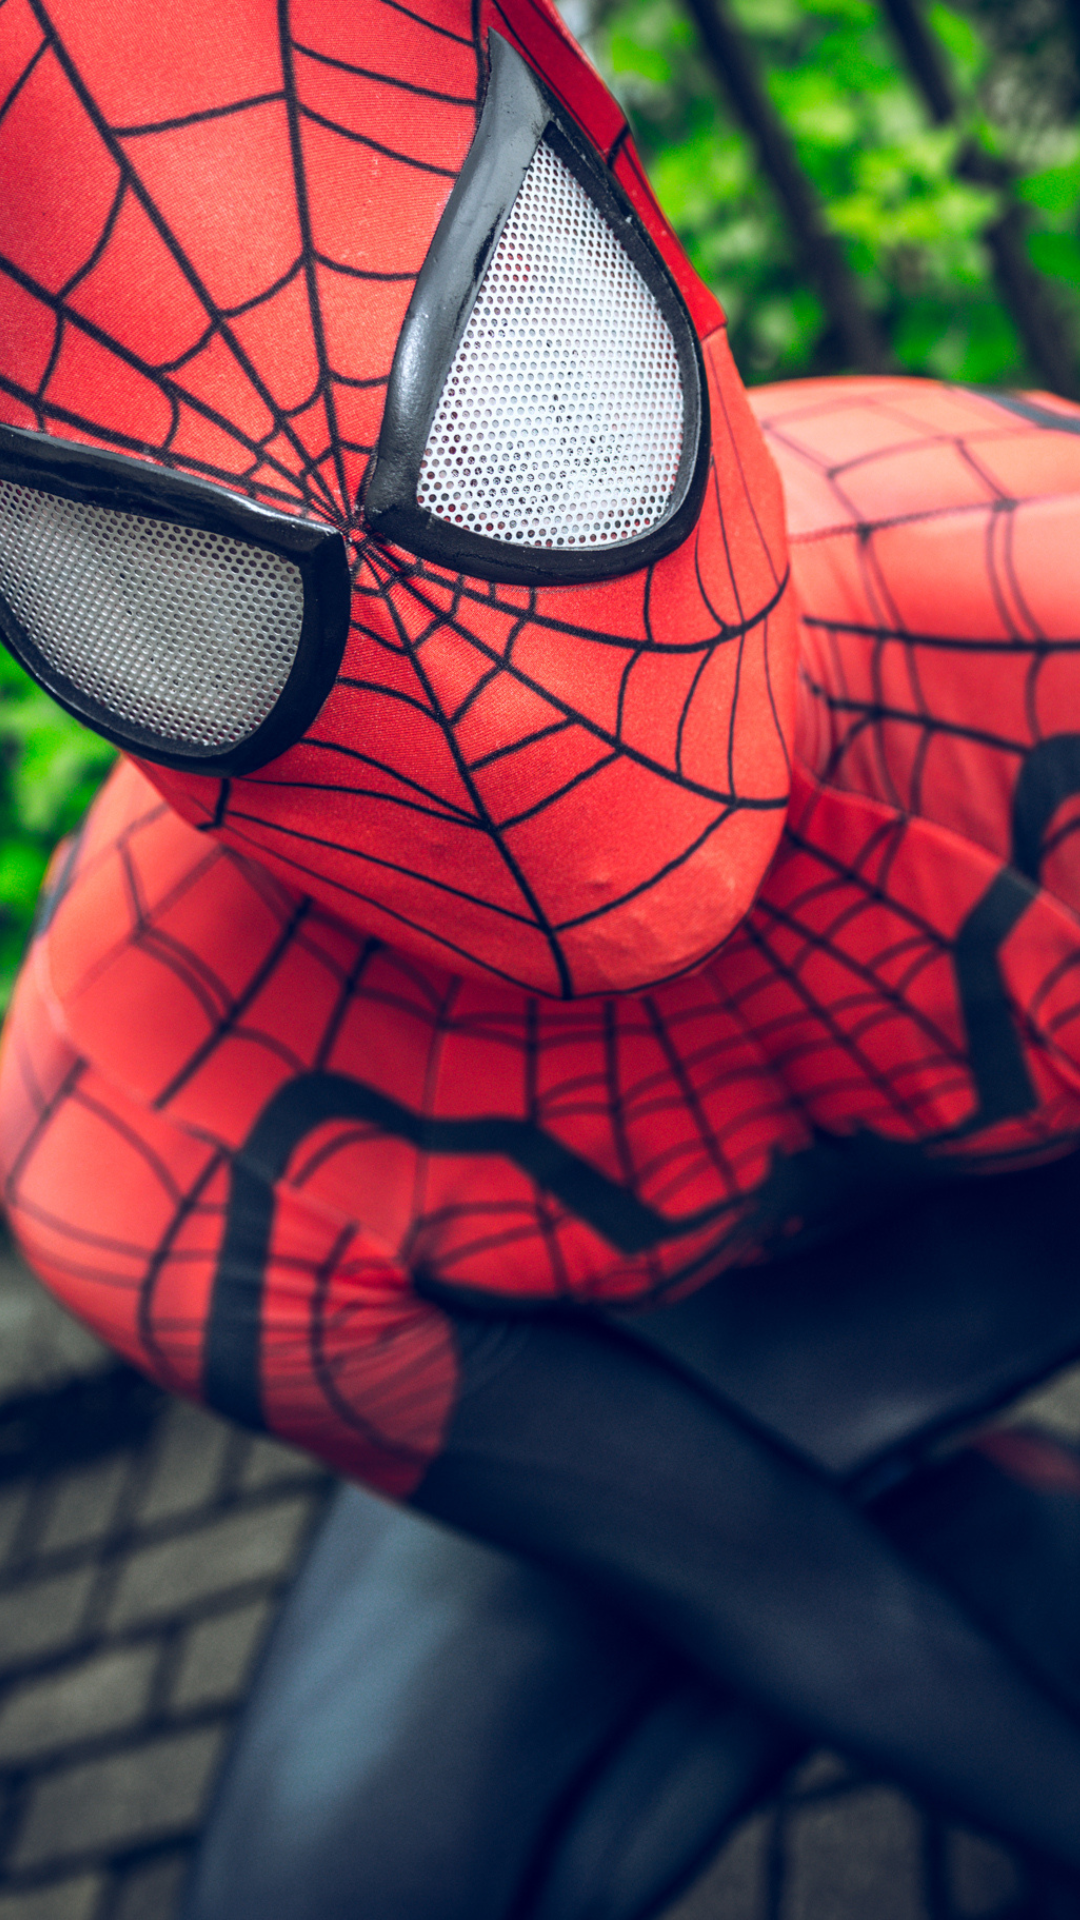 Things you didn't know about your friendly neighborhood Spider-man |  EconomicTimes